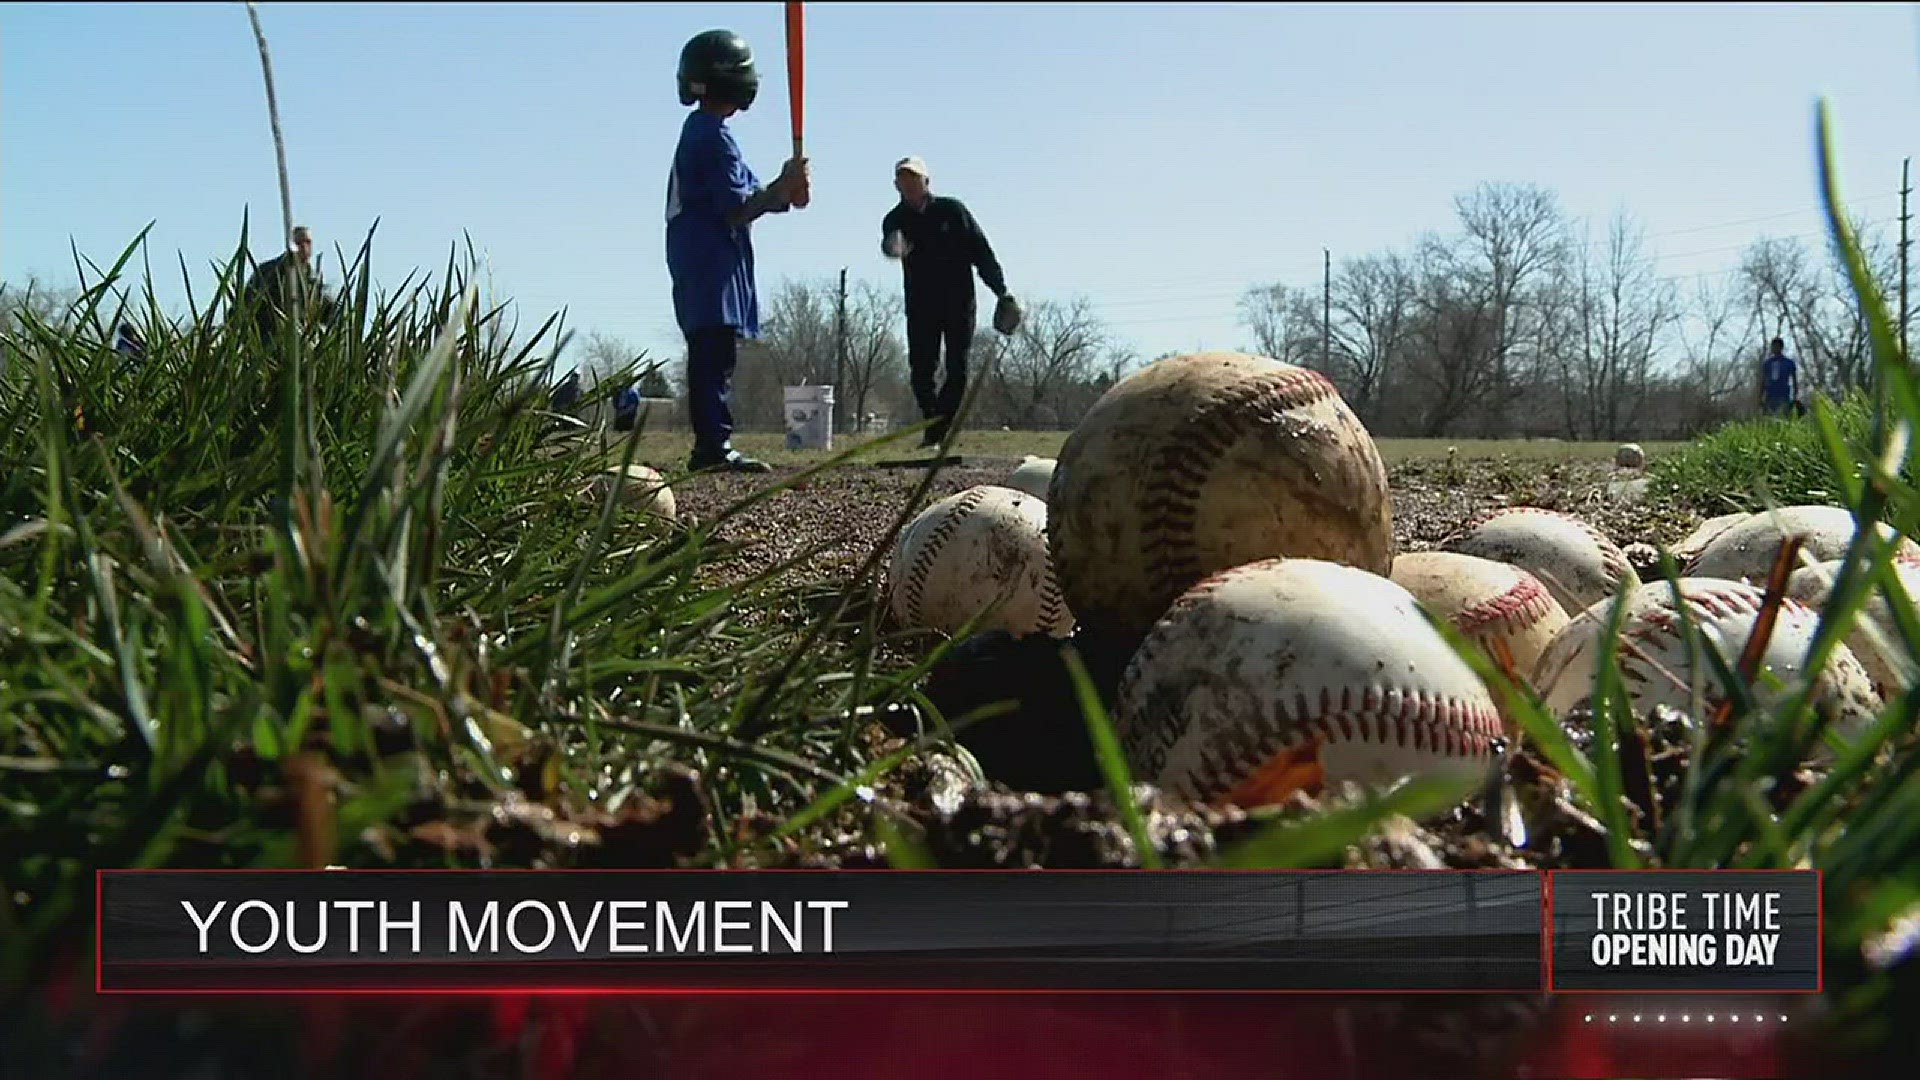 Transforming young lives in Cleveland through baseball